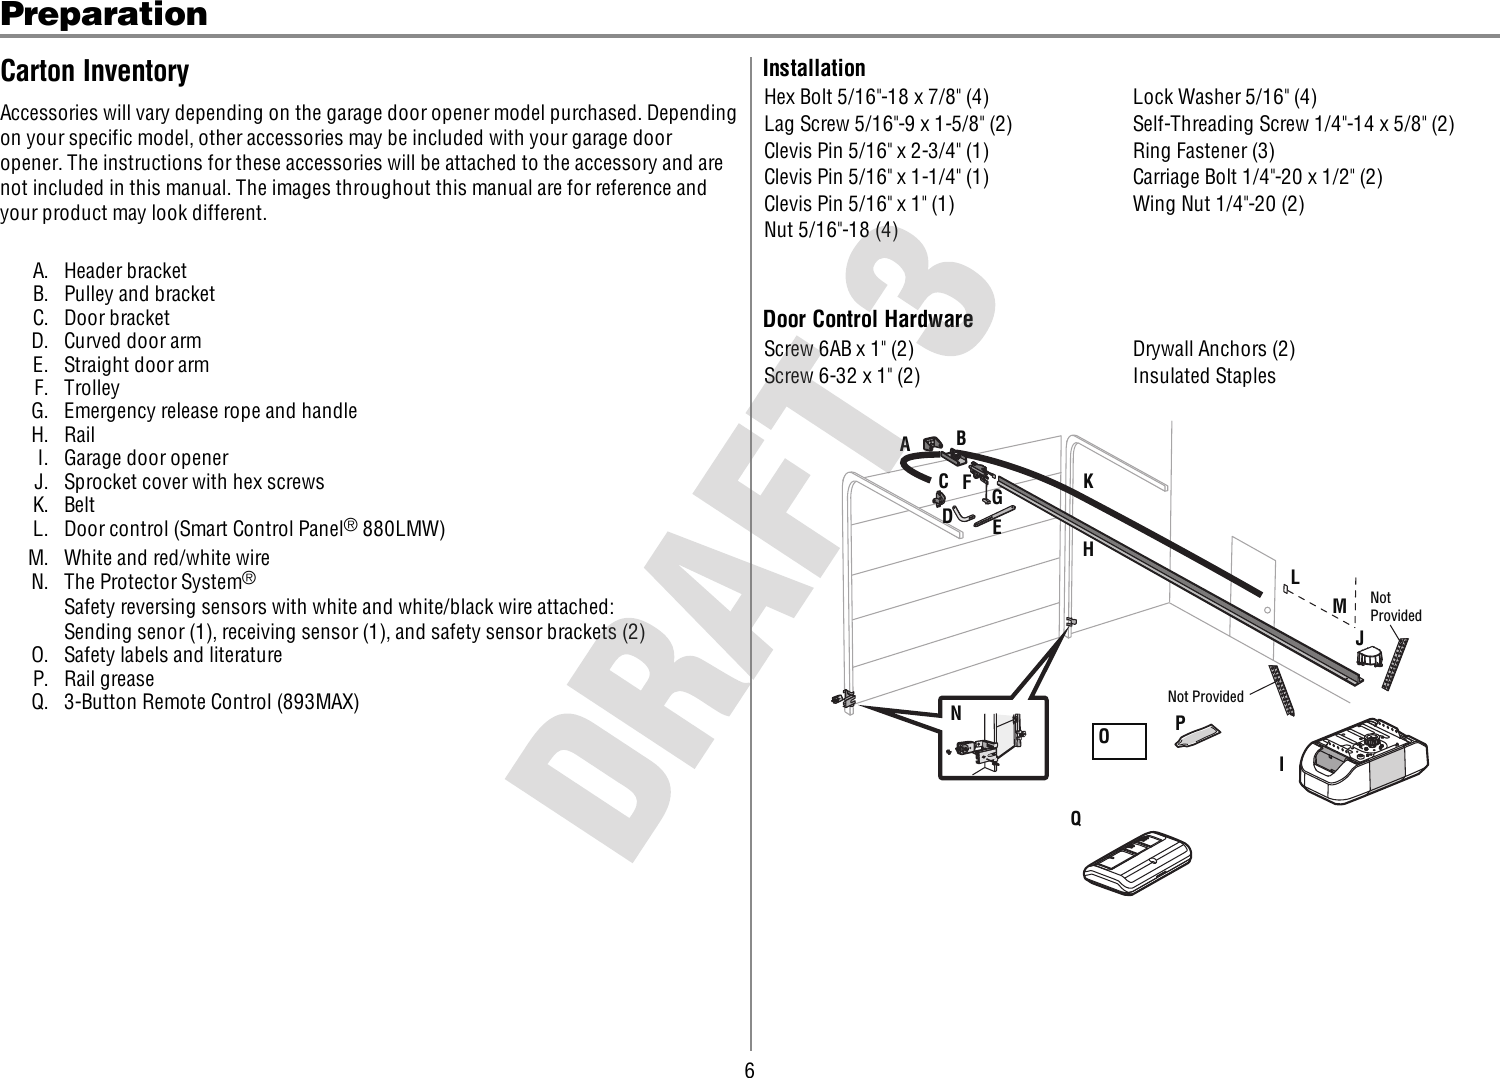 6PreparationCarton InventoryAccessories will vary depending on the garage door opener model purchased. Dependingon your specific model, other accessories may be included with your garage dooropener. The instructions for these accessories will be attached to the accessory and arenot included in this manual. The images throughout this manual are for reference andyour product may look different.A. Header bracketB. Pulley and bracketC. Door bracketD. Curved door armE. Straight door armF. TrolleyG. Emergency release rope and handleH. RailI. Garage door openerJ. Sprocket cover with hex screwsK. BeltL. Door control (Smart Control Panel®880LMW)M. White and red/white wireN. The Protector System®Safety reversing sensors with white and white/black wire attached:Sending senor (1), receiving sensor (1), and safety sensor brackets (2)O. Safety labels and literatureP. Rail greaseQ. 3-Button Remote Control (893MAX)InstallationHex Bolt 5/16&quot;-18 x 7/8&quot; (4) Lock Washer 5/16&quot; (4)Lag Screw 5/16&quot;-9 x 1-5/8&quot; (2) Self-Threading Screw 1/4&quot;-14 x 5/8&quot; (2)Clevis Pin 5/16&quot; x 2-3/4&quot; (1) Ring Fastener (3)Clevis Pin 5/16&quot; x 1-1/4&quot; (1) Carriage Bolt 1/4&quot;-20 x 1/2&quot; (2)Clevis Pin 5/16&quot; x 1&quot; (1) Wing Nut 1/4&quot;-20 (2)Nut 5/16&quot;-18 (4)Door Control HardwareScrew 6AB x 1&quot; (2) Drywall Anchors (2)Screw 6-32 x 1&quot; (2) Insulated StaplesABCJNIOPDEFHGKLMNot ProvidedNot ProvidedQ